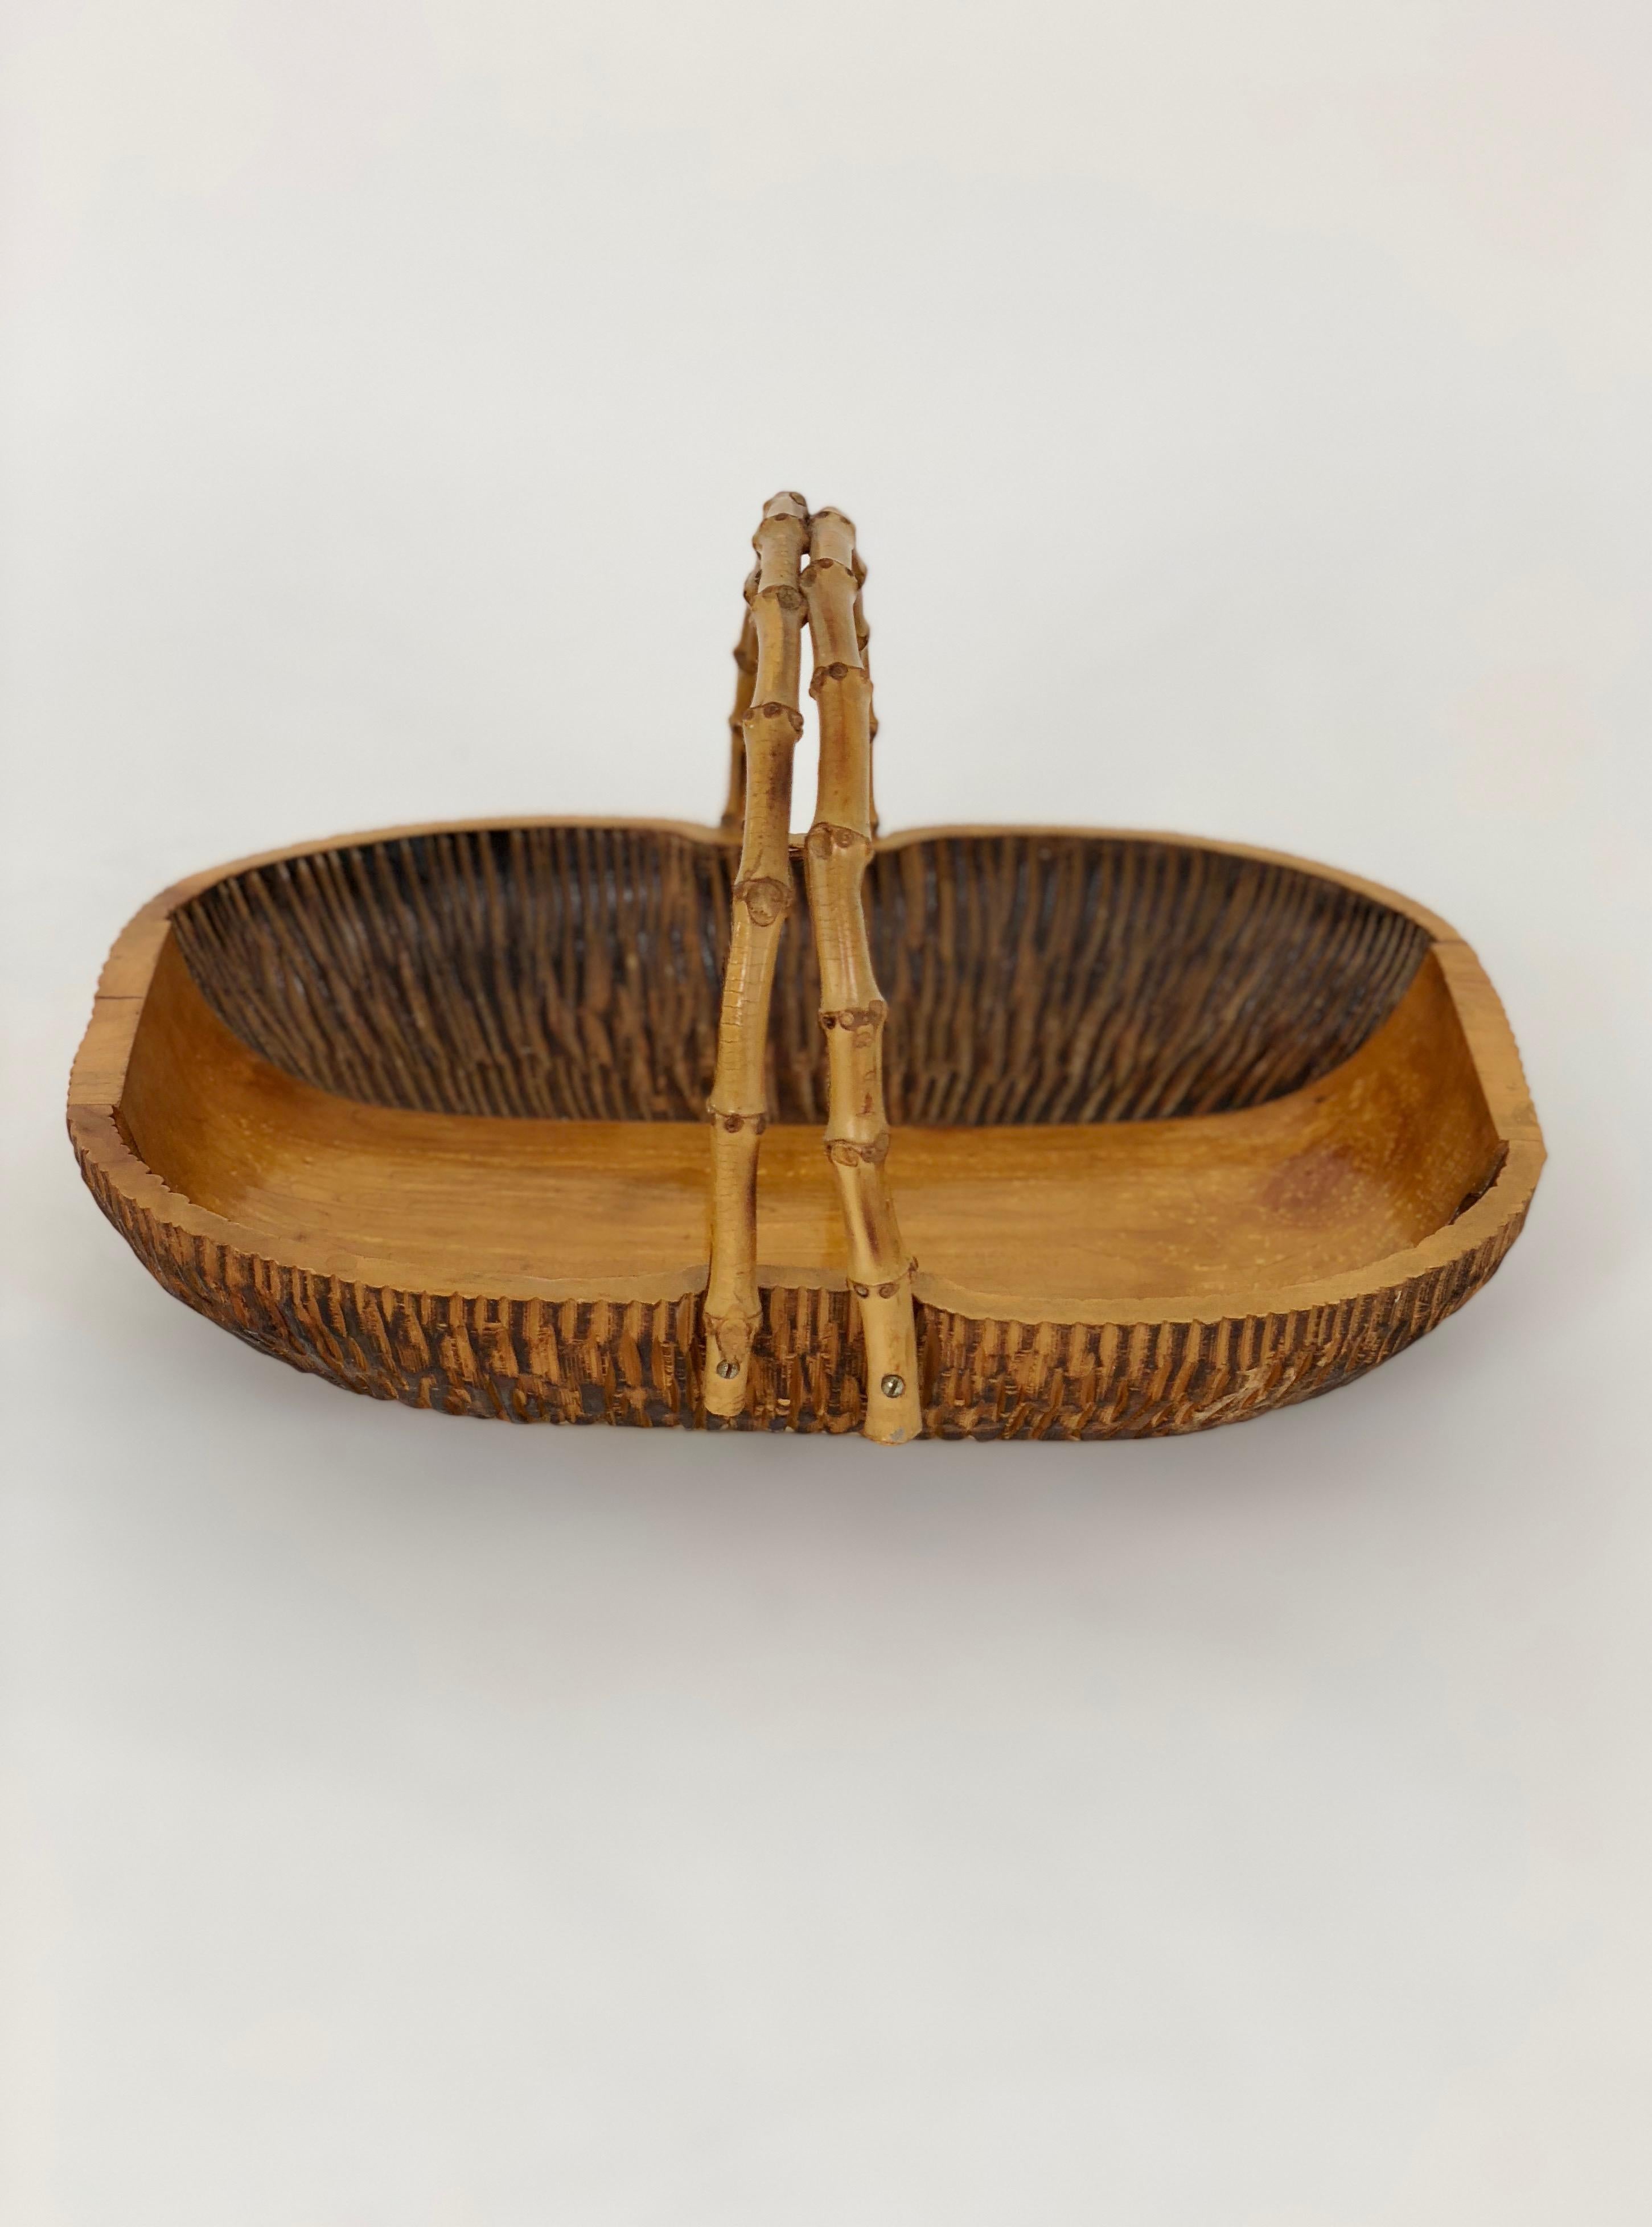 Aldo Tura for Macabo fruit walnut bowl centrepiece hand carved wood and bamboo handles, Italy, 1950s. 

The original stamp is on the bottom.